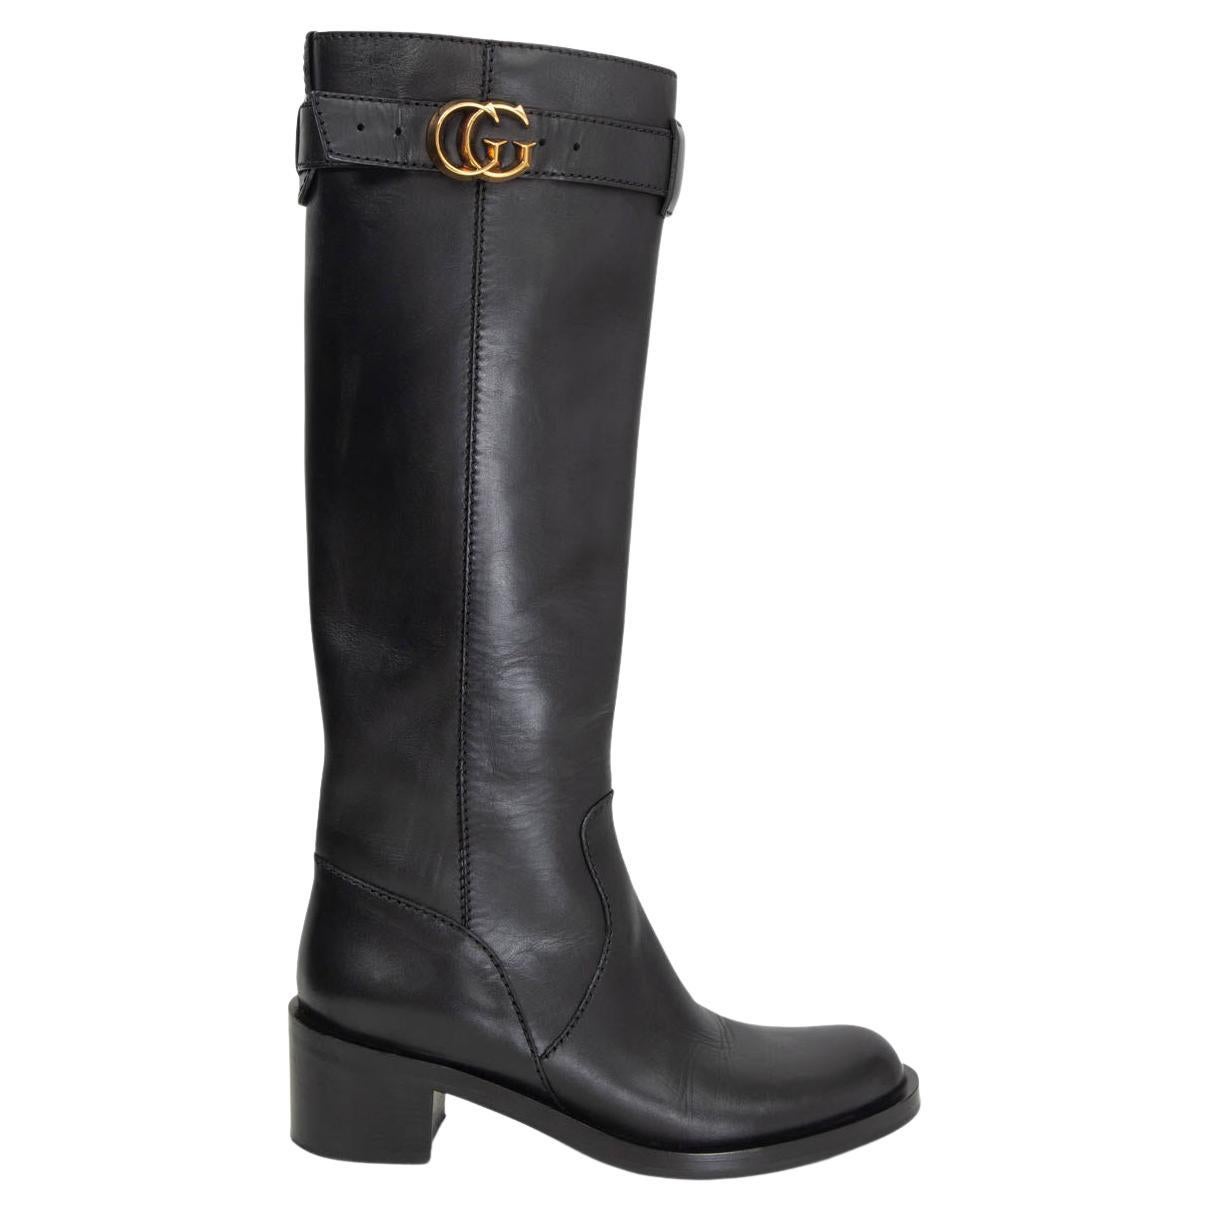 GUCCI black leather GG BUCKLE RIDING Boots Shoes 36.5